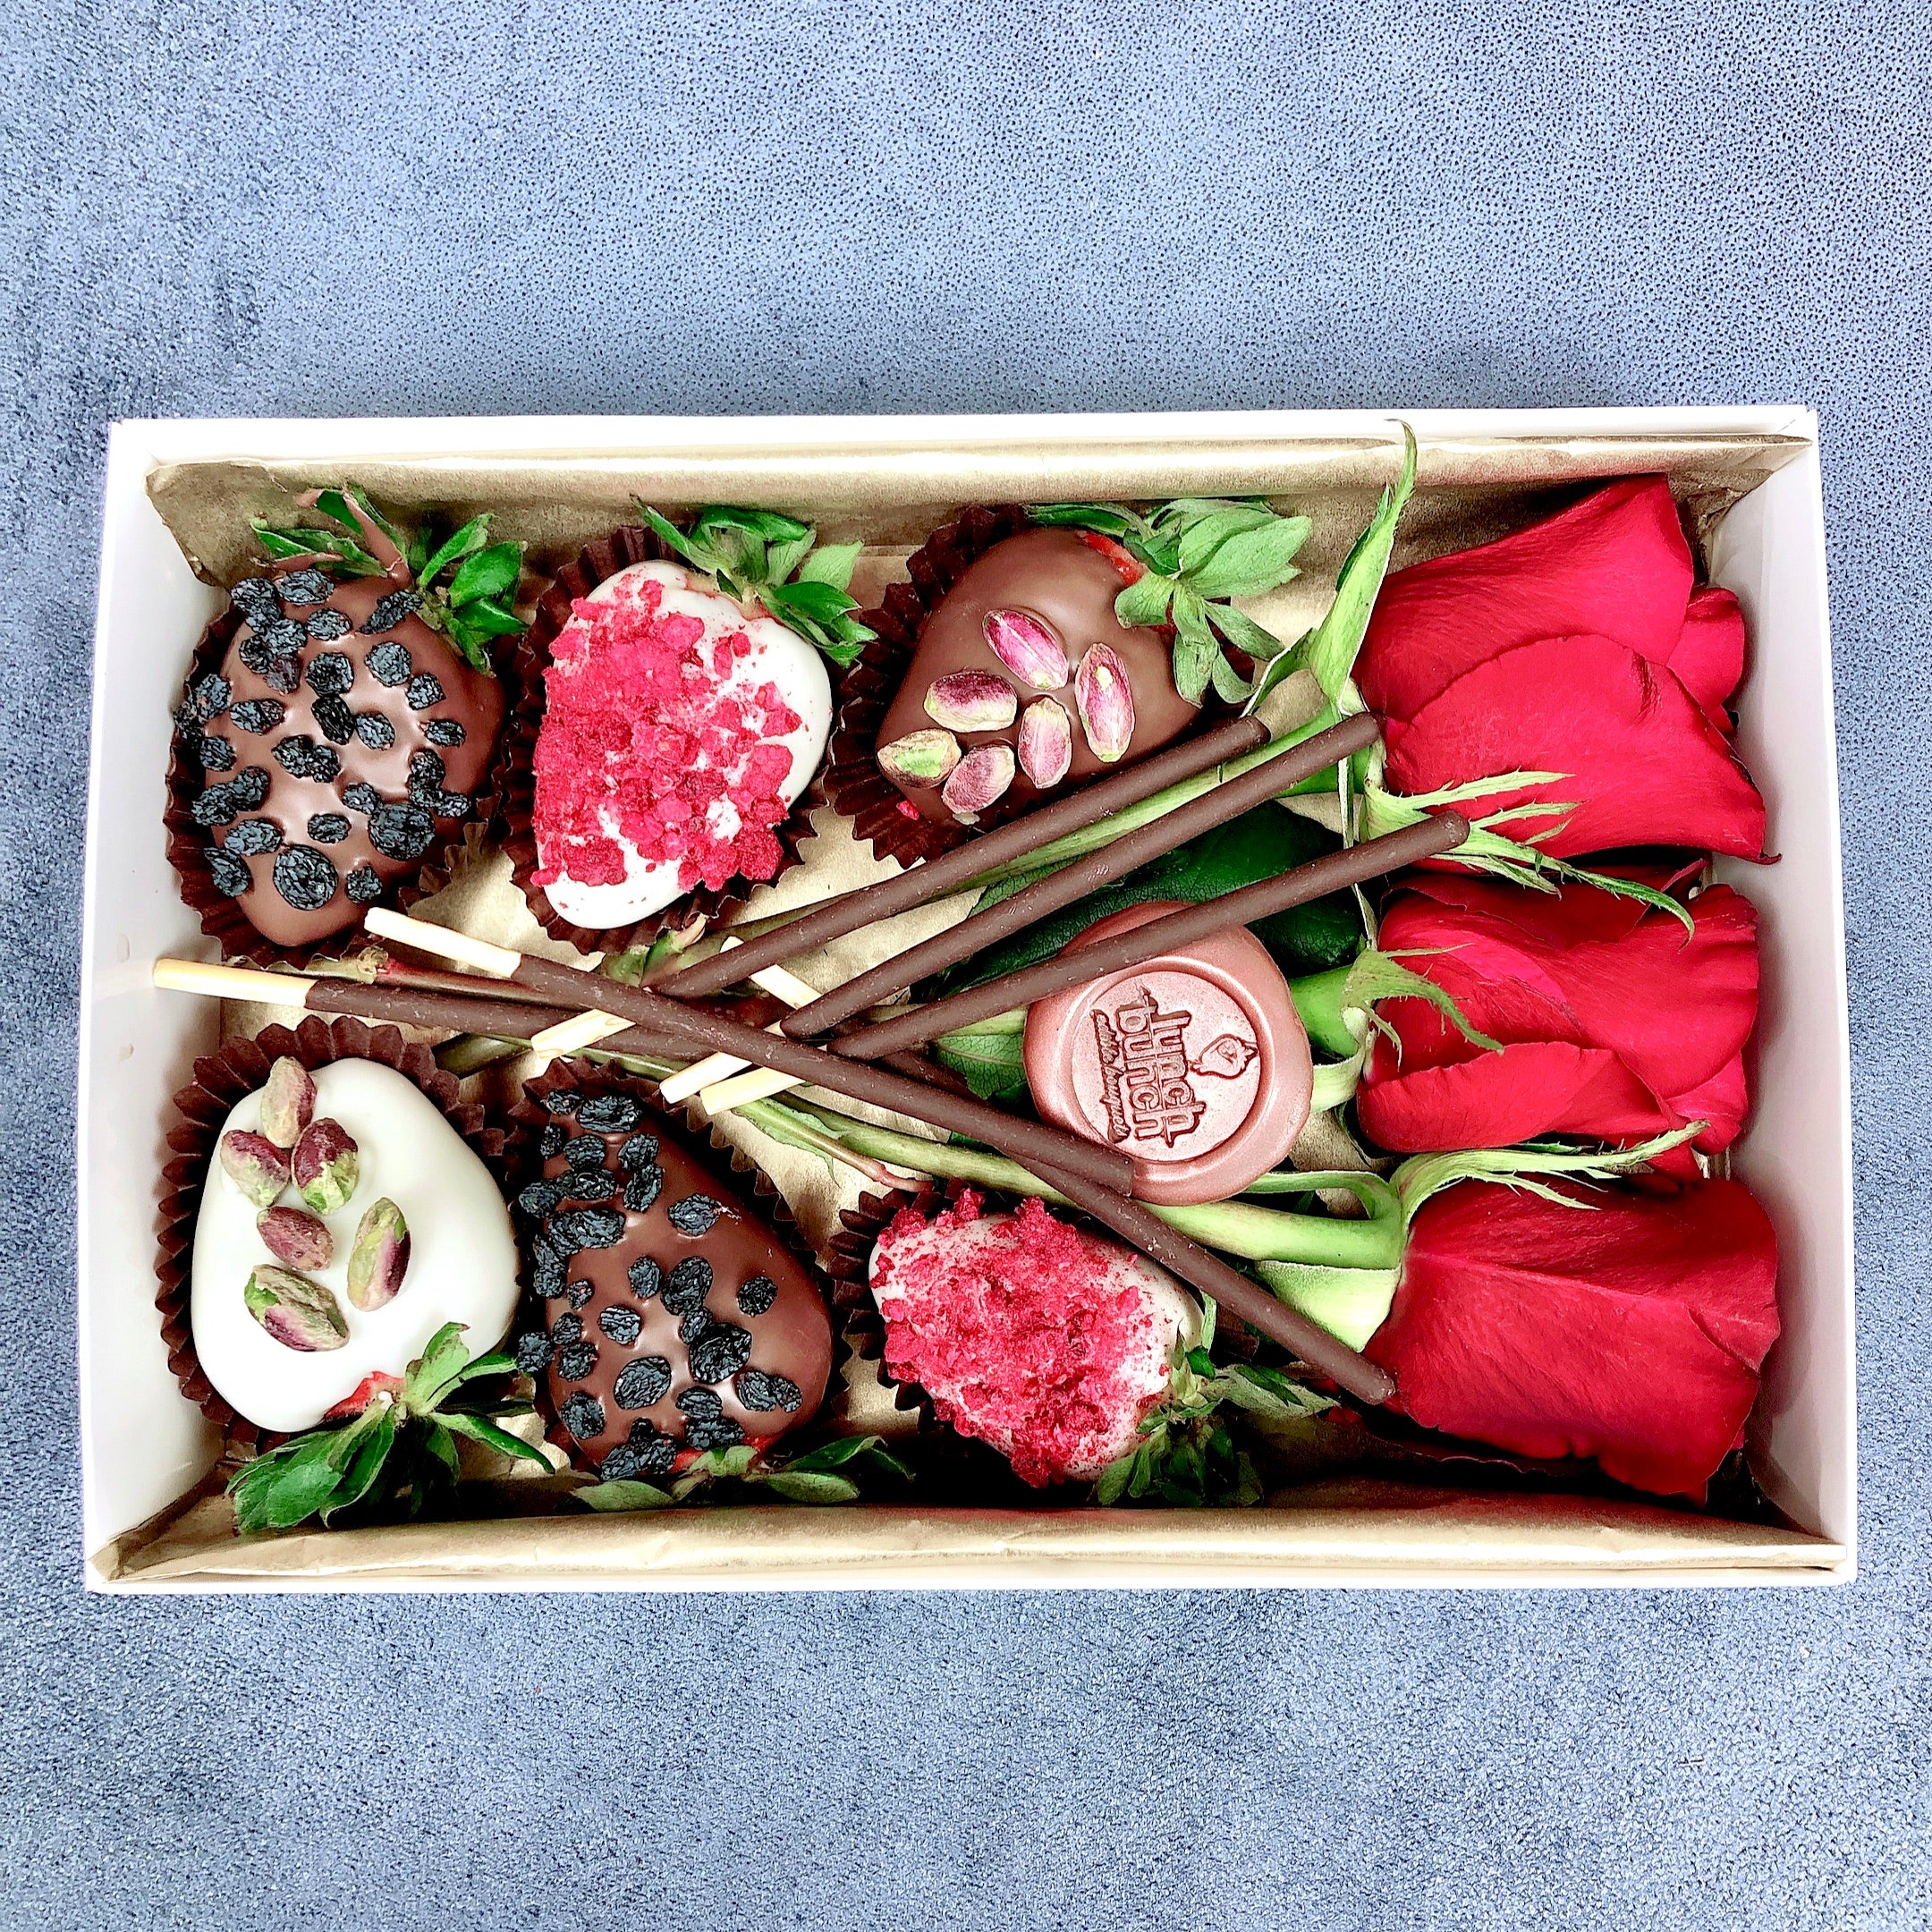 Red roses and chocolate covered strawberries give the box